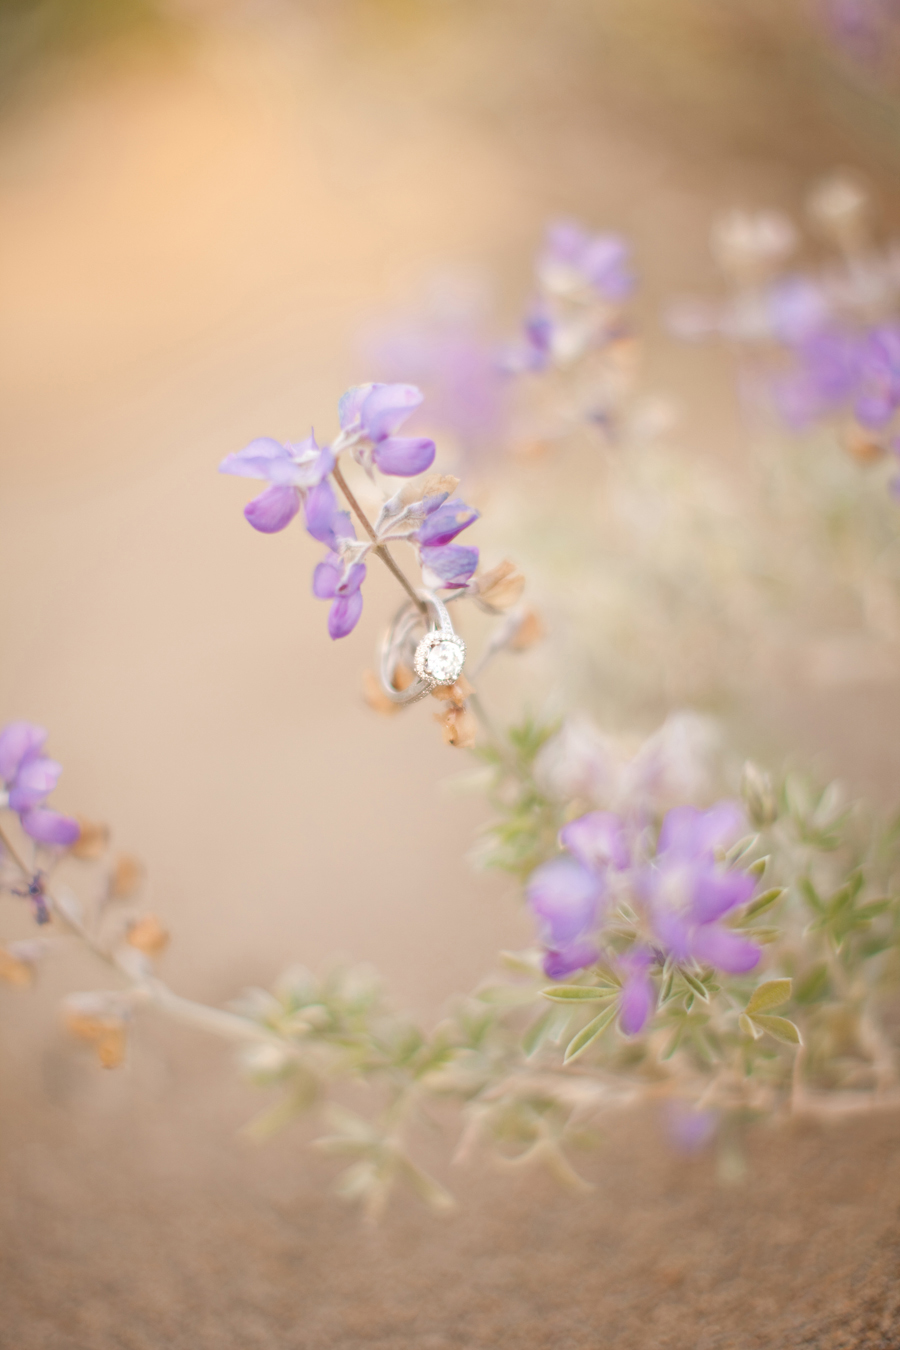 Sarah's engagement ring hangs off the purple flowers.